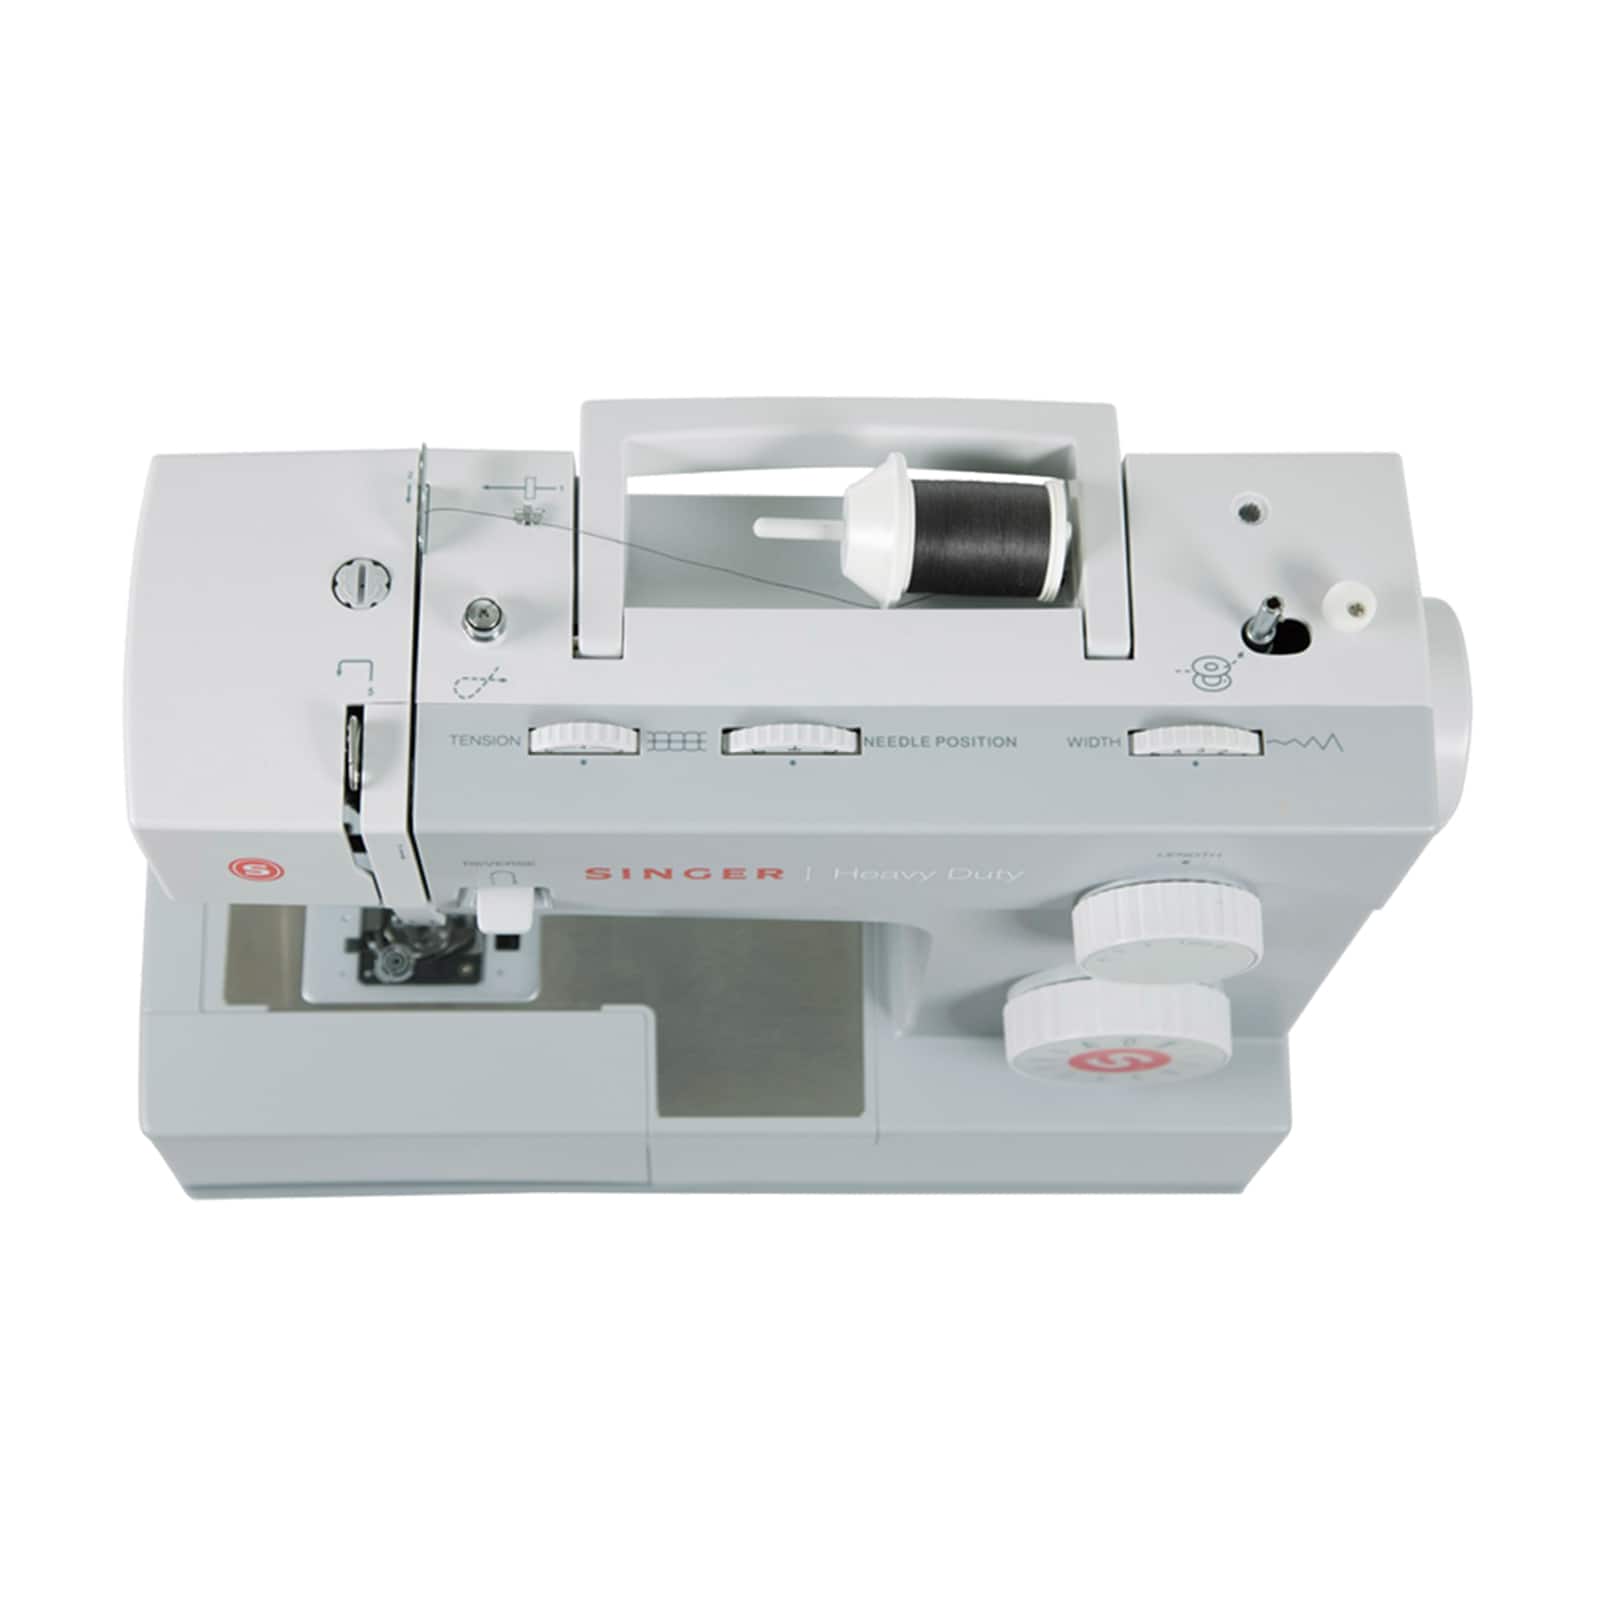 Singer® Heavy Duty 4411 Sewing Machine - Ripstop by the Roll